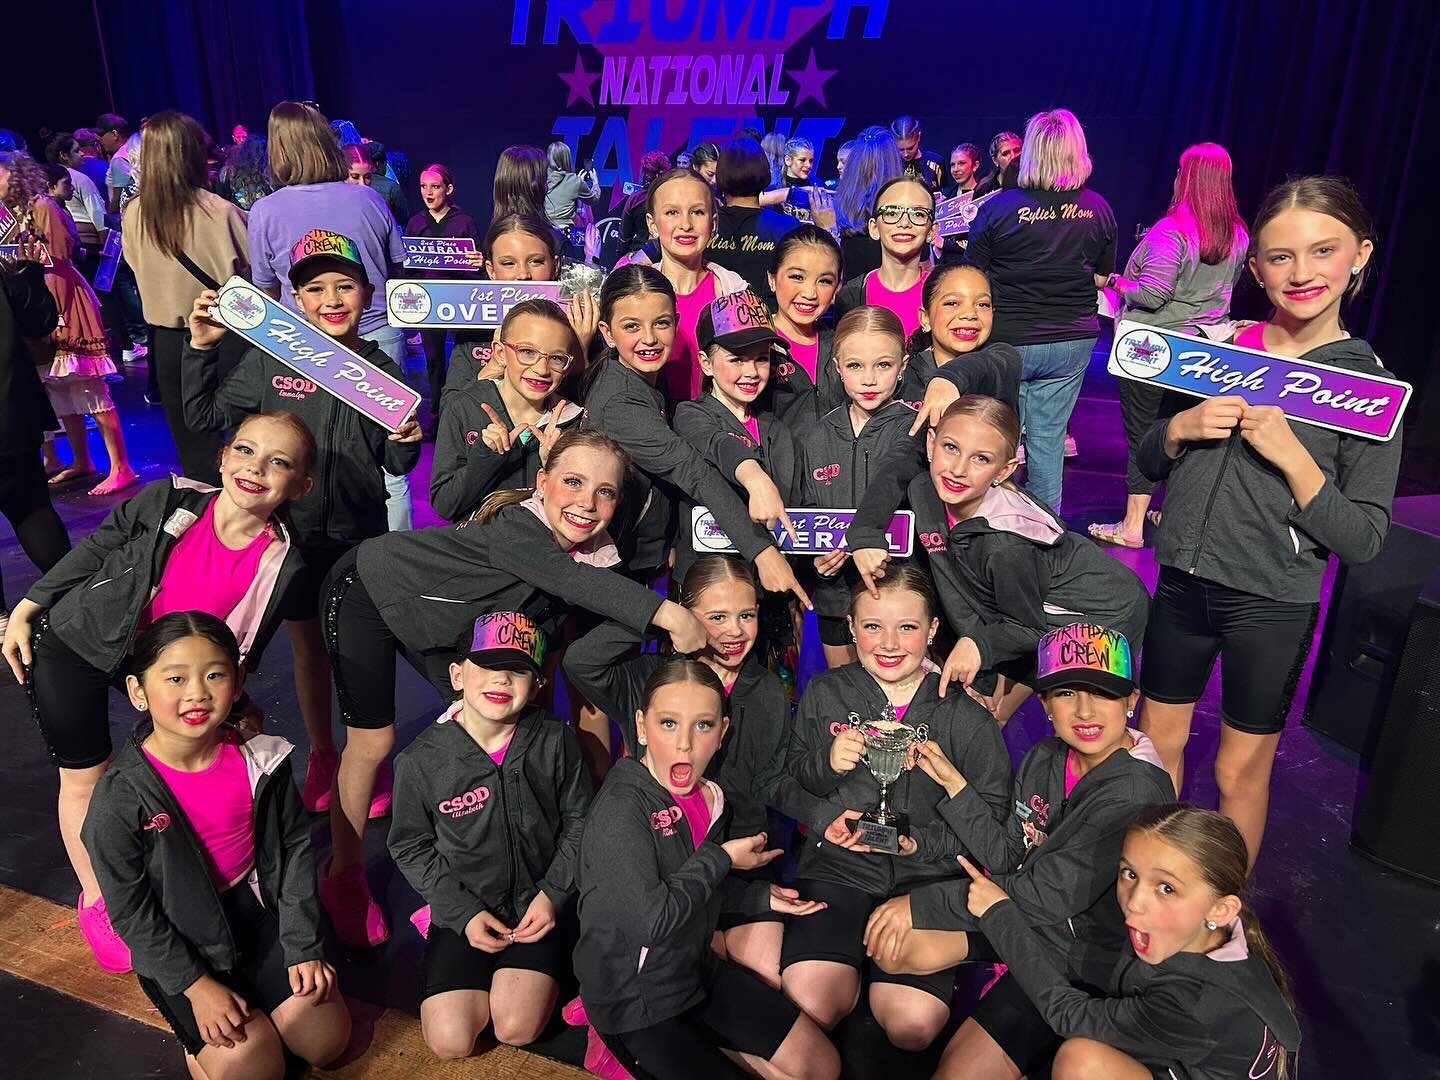 Congratulations to our Prep Company, the Crystal Cup Winners, as Top 11 &amp; under dance @triumphtalent this weekend. Mini Prep &amp; Junior Prep also received 1st Overall for their jazz dances in their age groups and special judges&rsquo; awards. ?